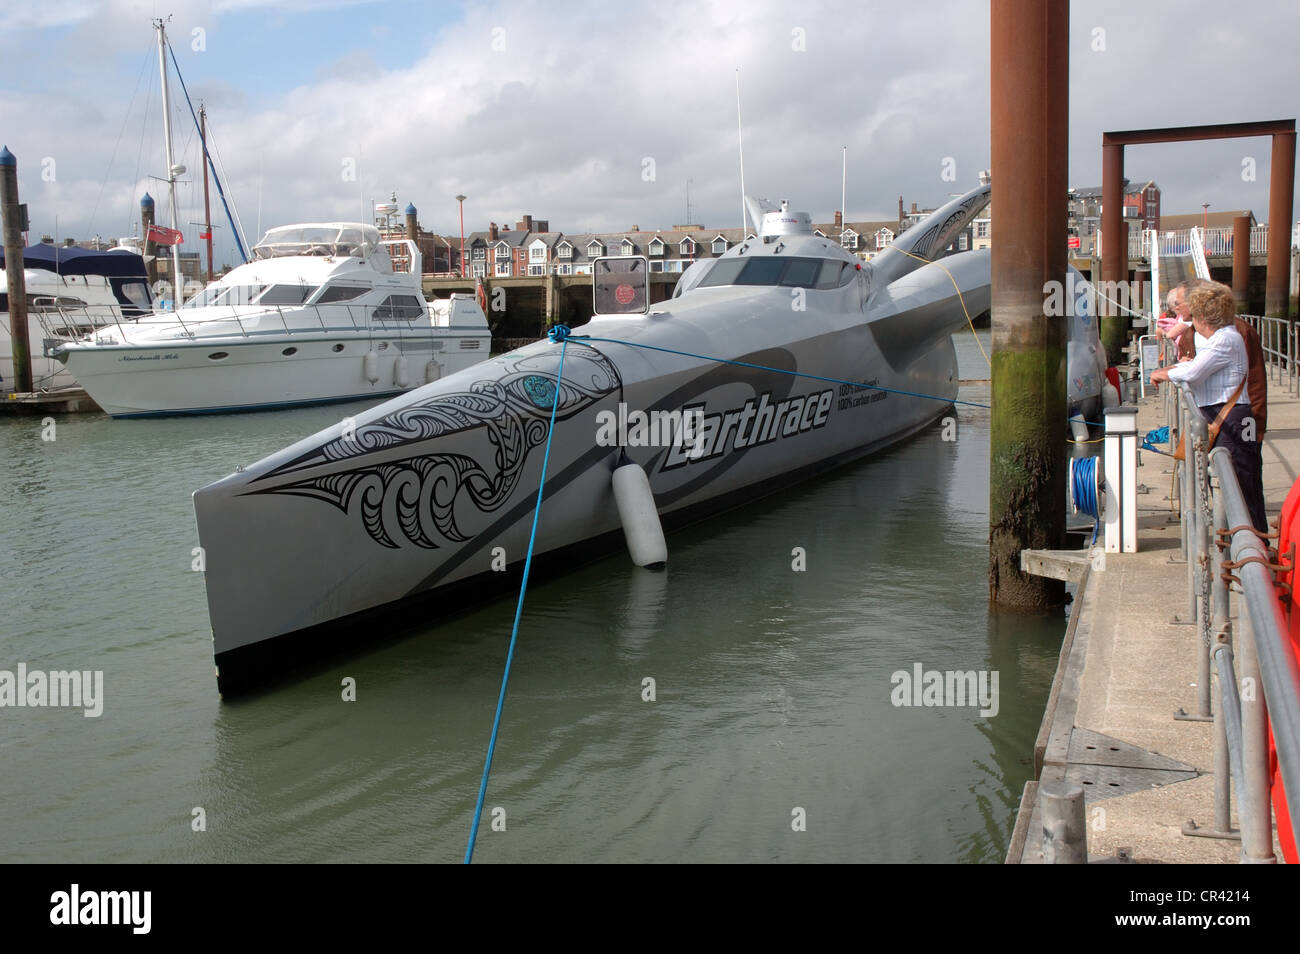 Round the world powerboat record holder Earthrace (AKA Ady Gil), berthed in Lowestoft, Suffolk, UK Stock Photo